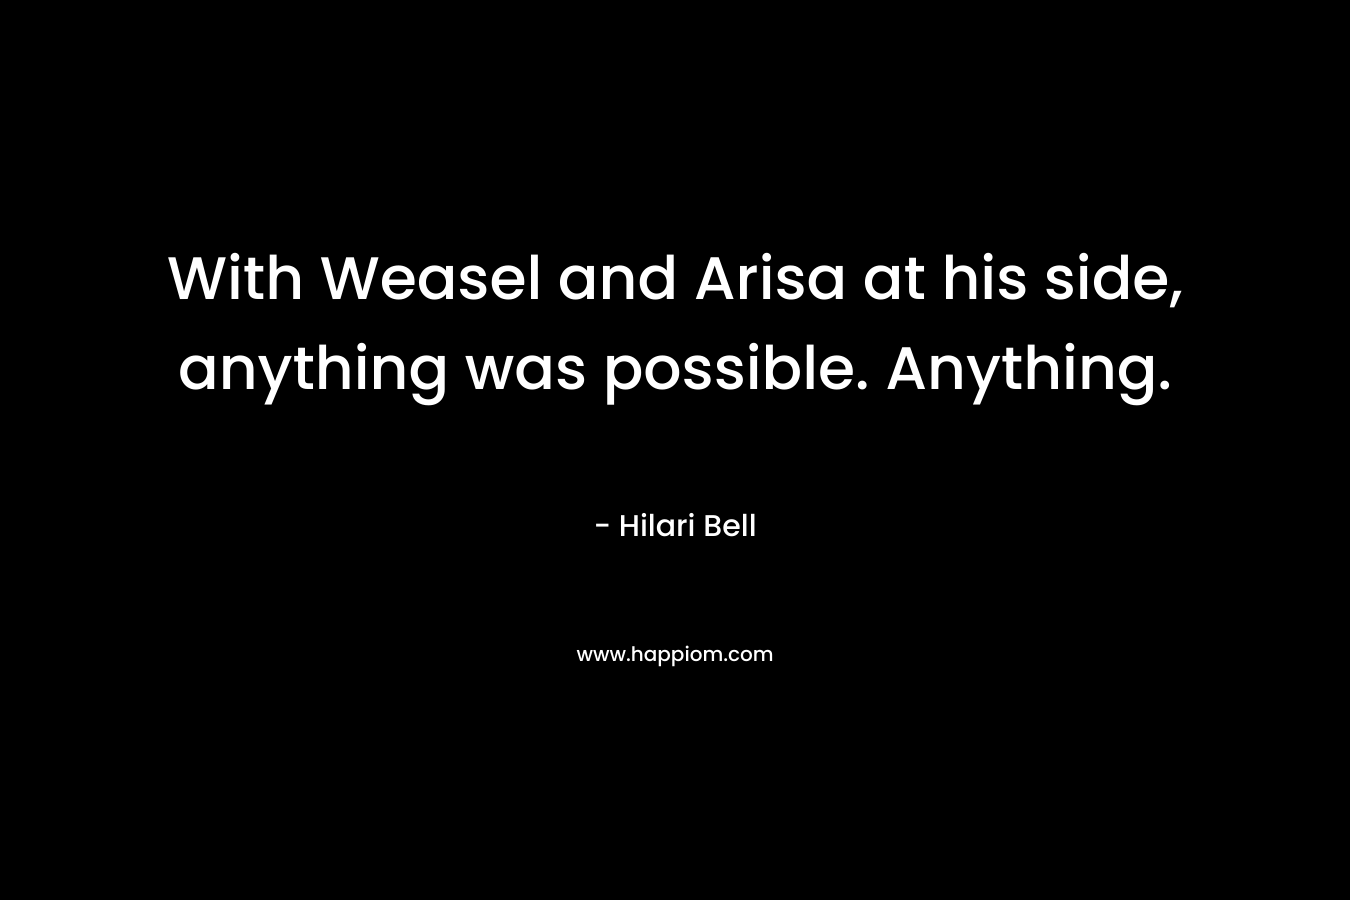 With Weasel and Arisa at his side, anything was possible. Anything.